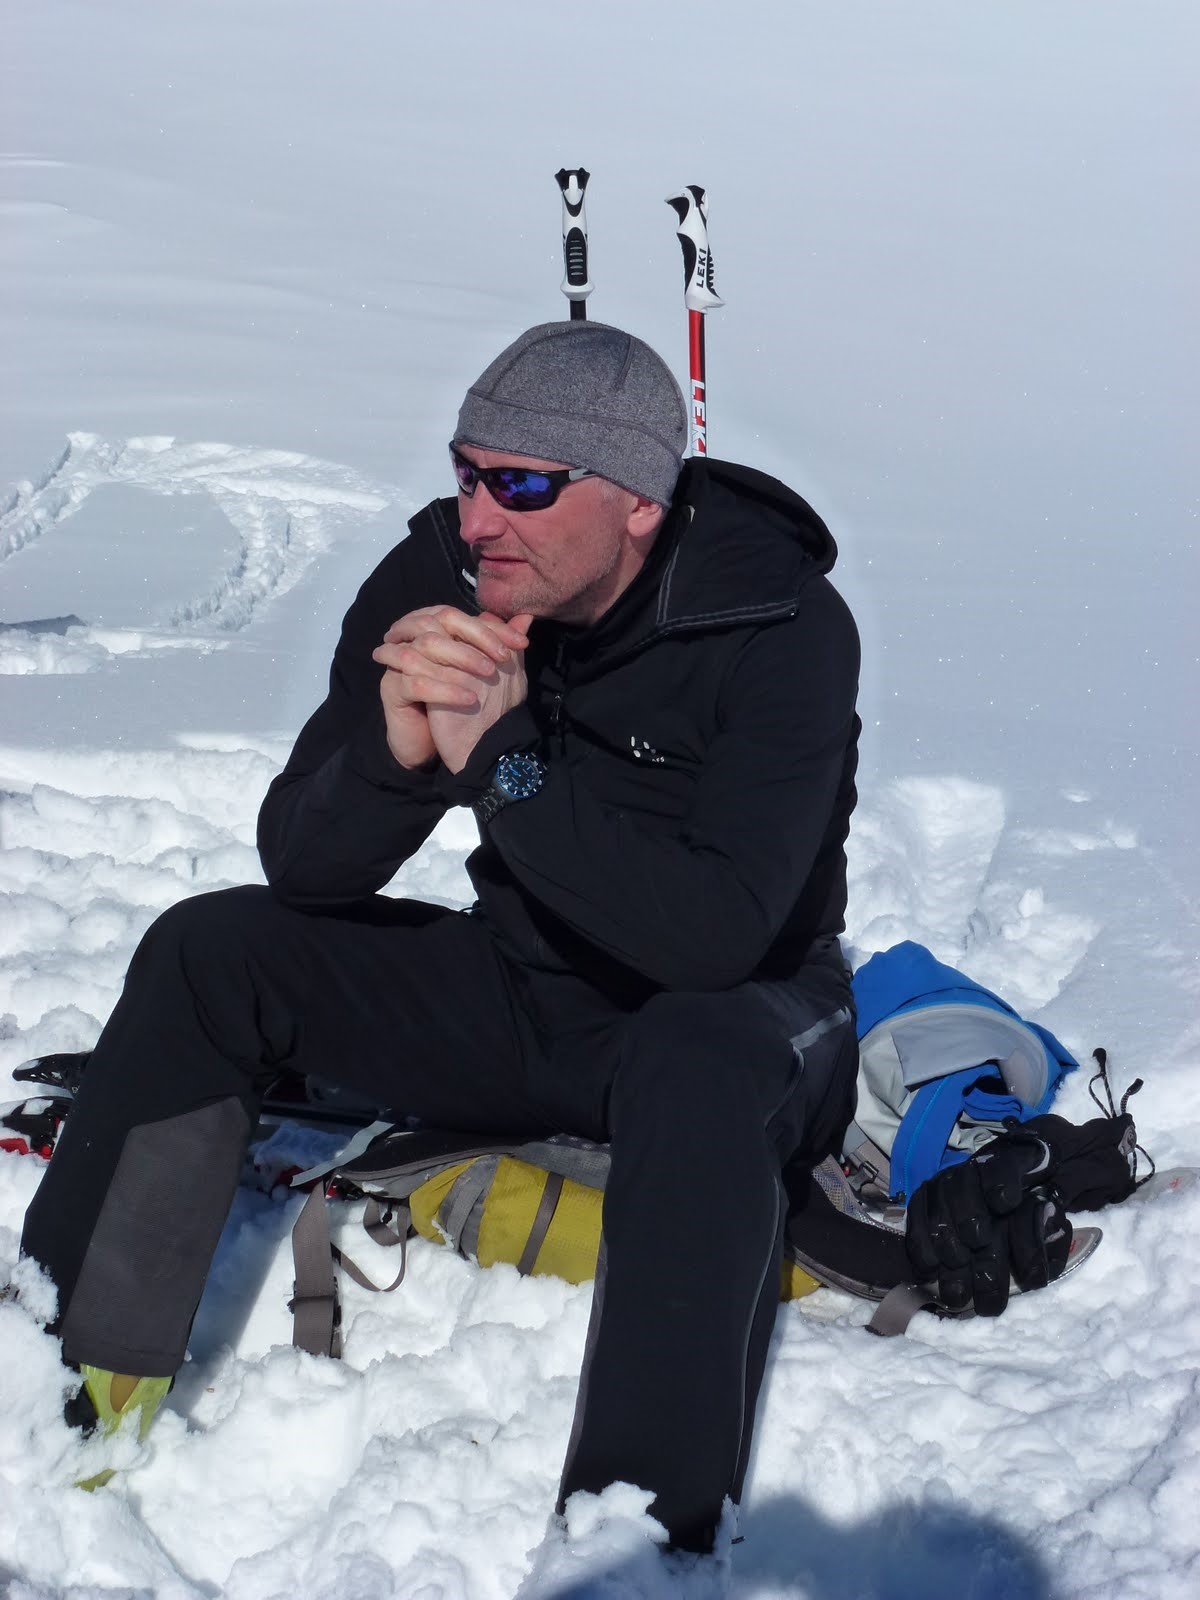 Mike Park of Mountain Rescue England & Wales sitting on a snowy mountain equipped with his mountain gear